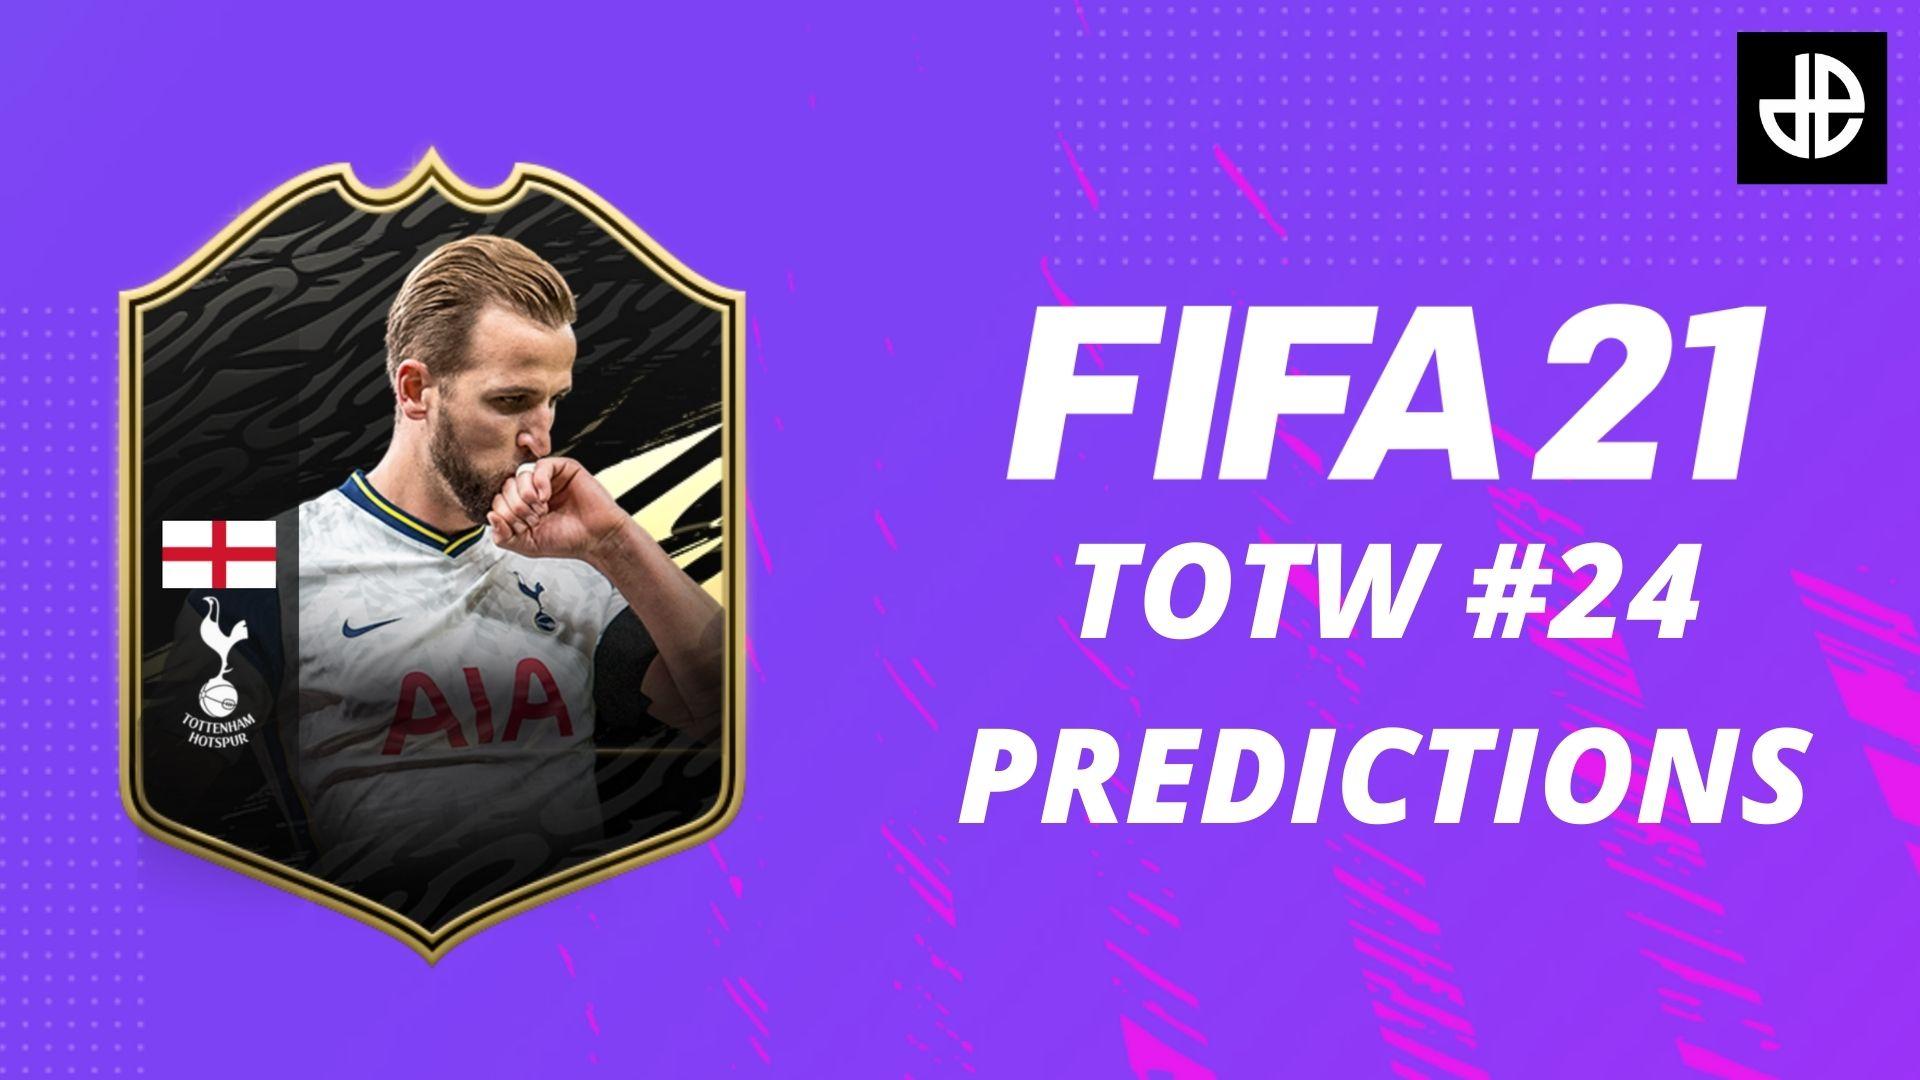 EA FC 24 TOTW 2 leaks and predictions with Barcelona, Bayern